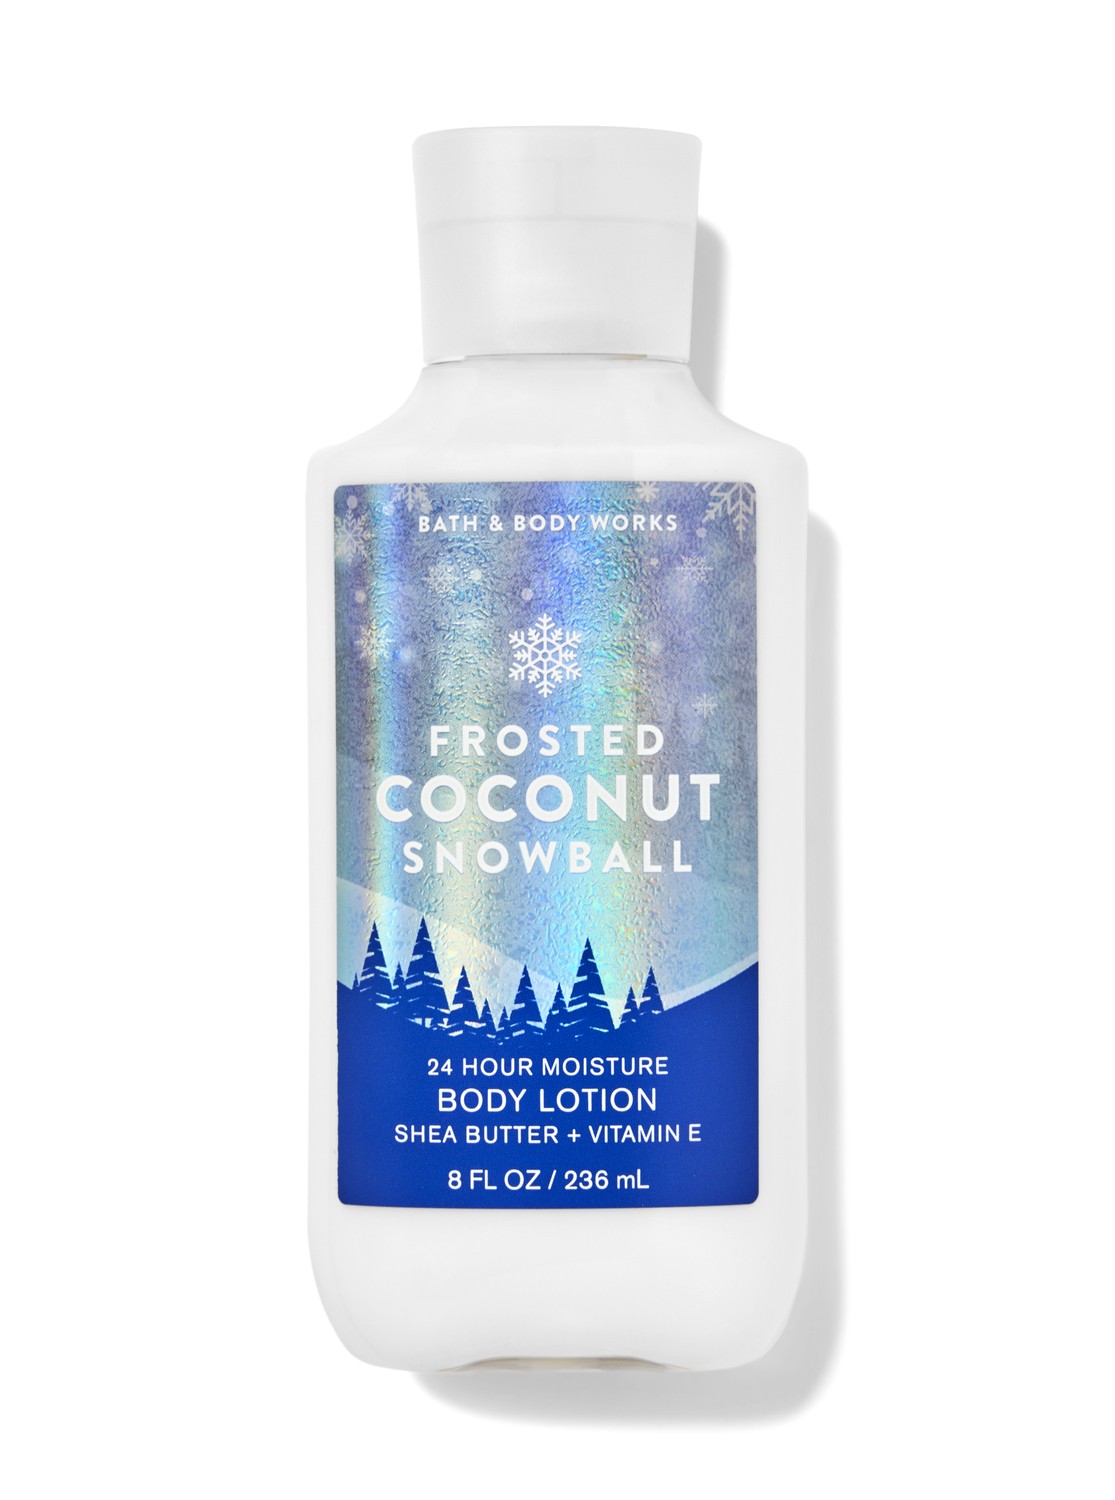 Buy Frosted Coconut Snowball Super Smooth Body Lotion Online Bath And Body Works Australia